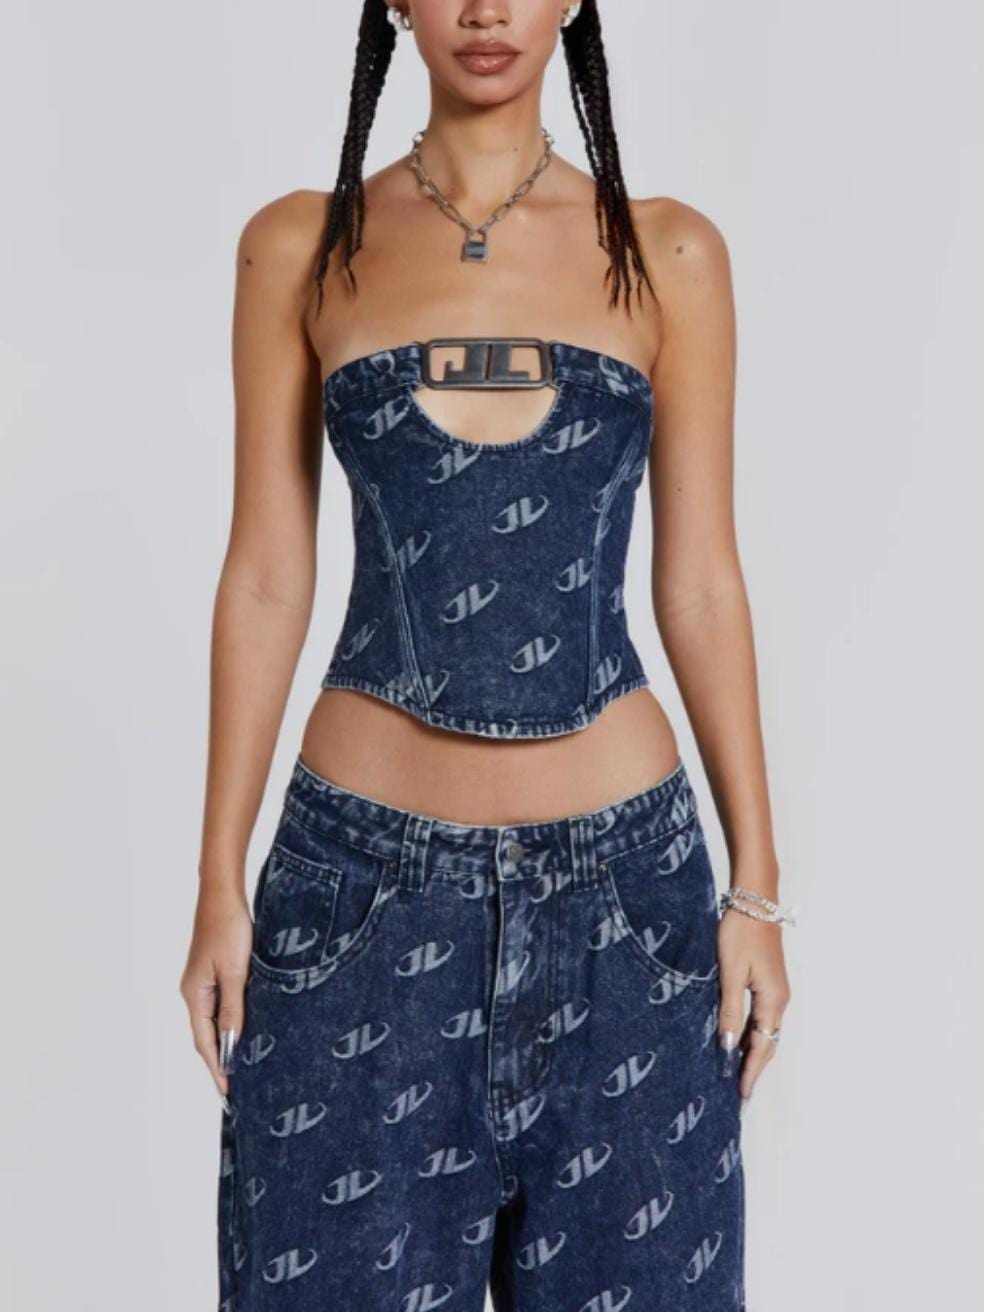 Monogram strapless corset top and baggy jeans